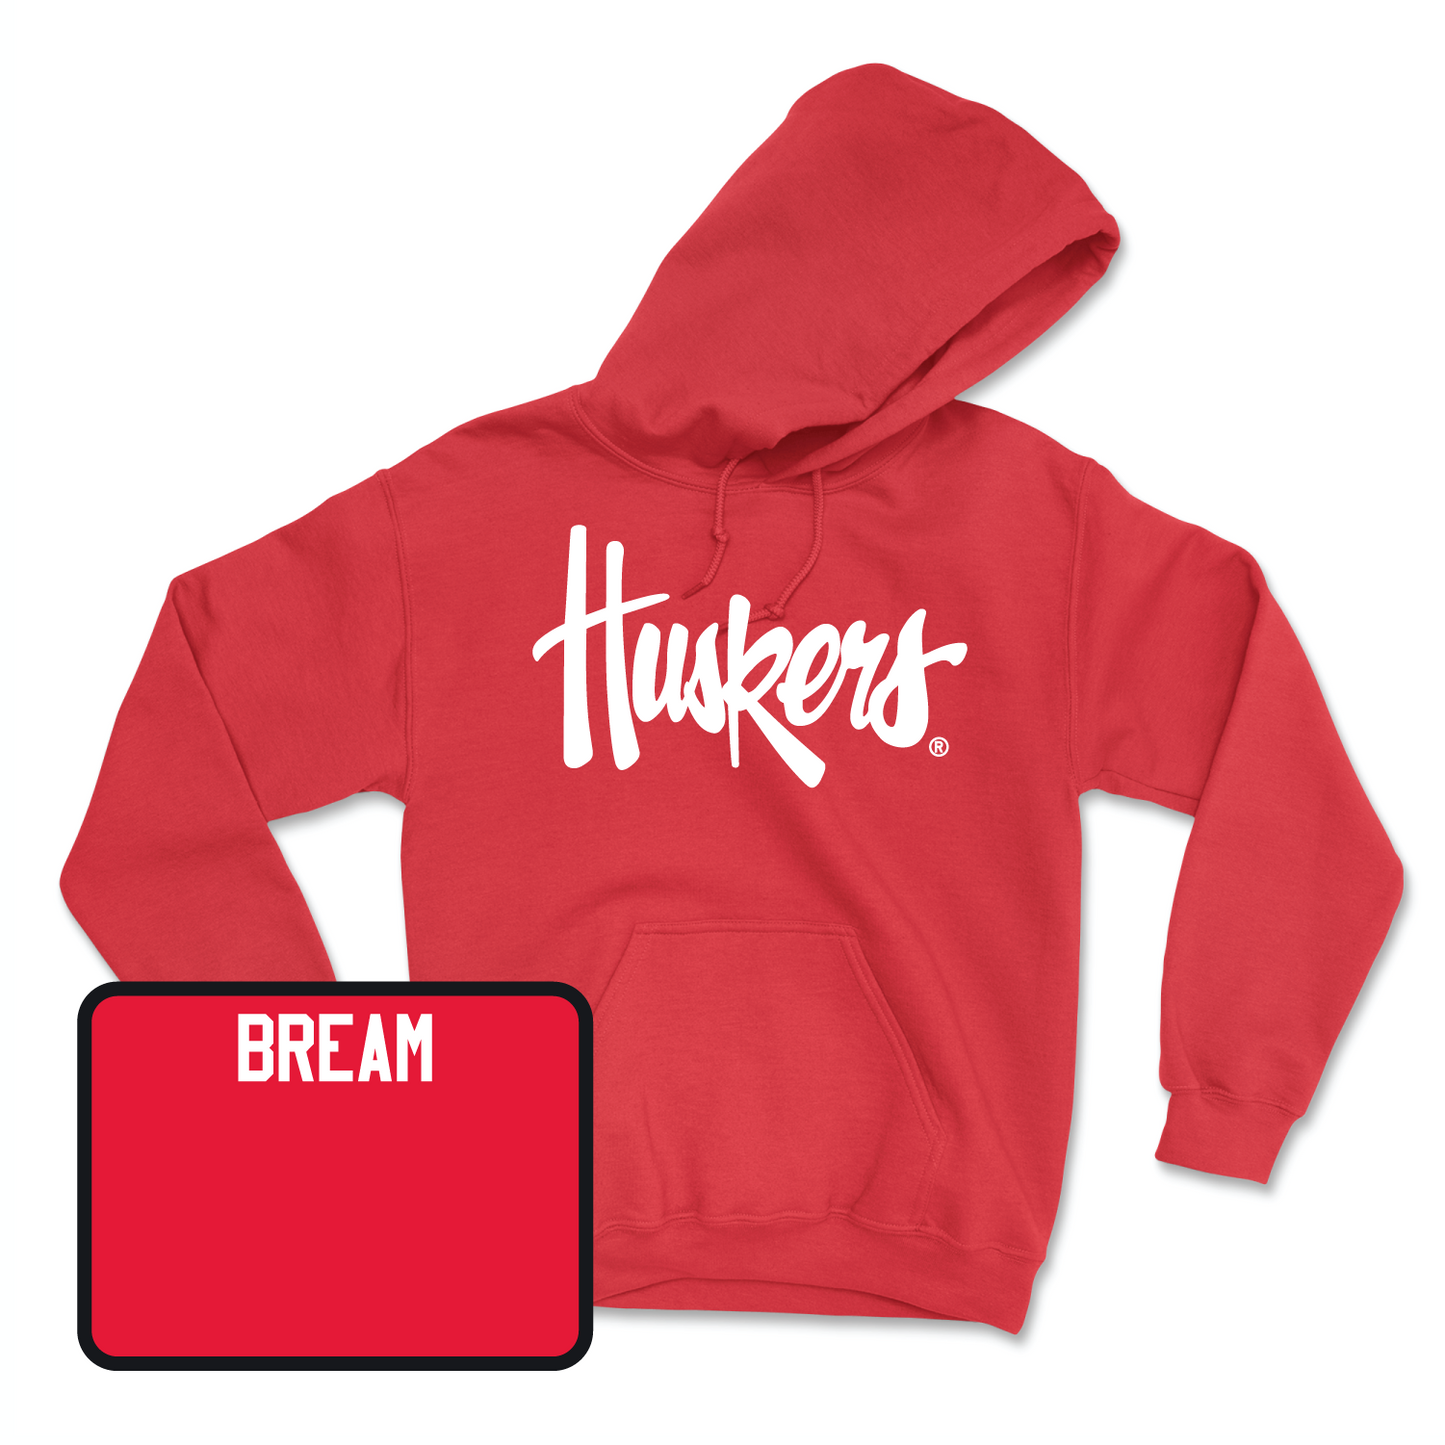 Red Women's Golf Huskers Hoodie 3X-Large / Brooke Bream